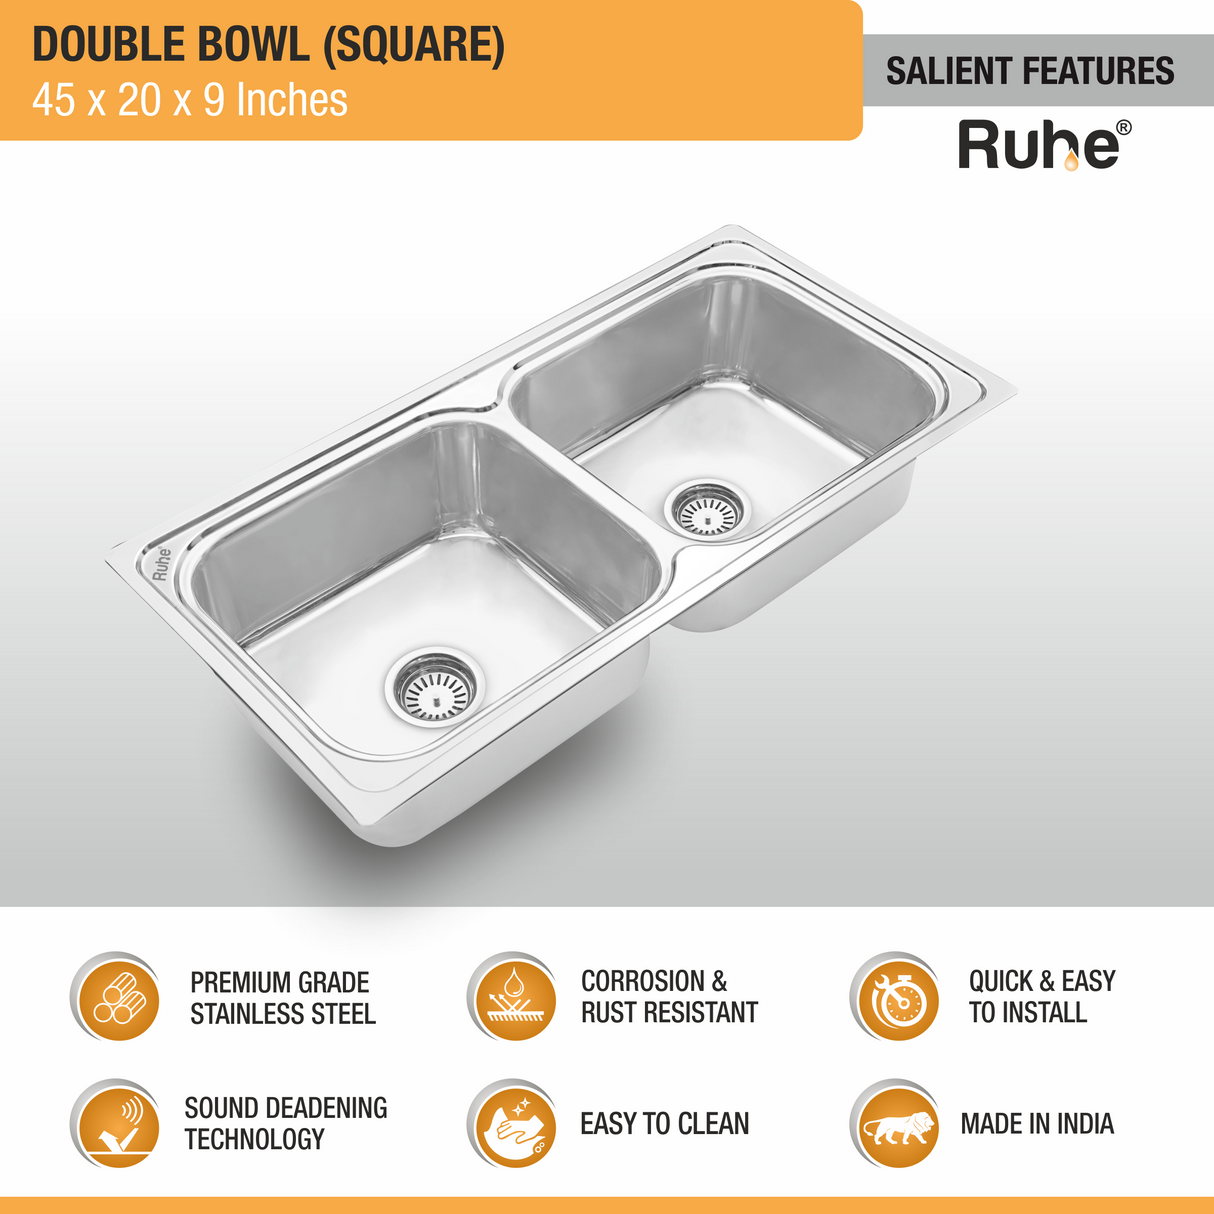 Square Double Bowl Premium Stainless Steel Kitchen Sink (45 x 20 x 9 inches) features and benefits